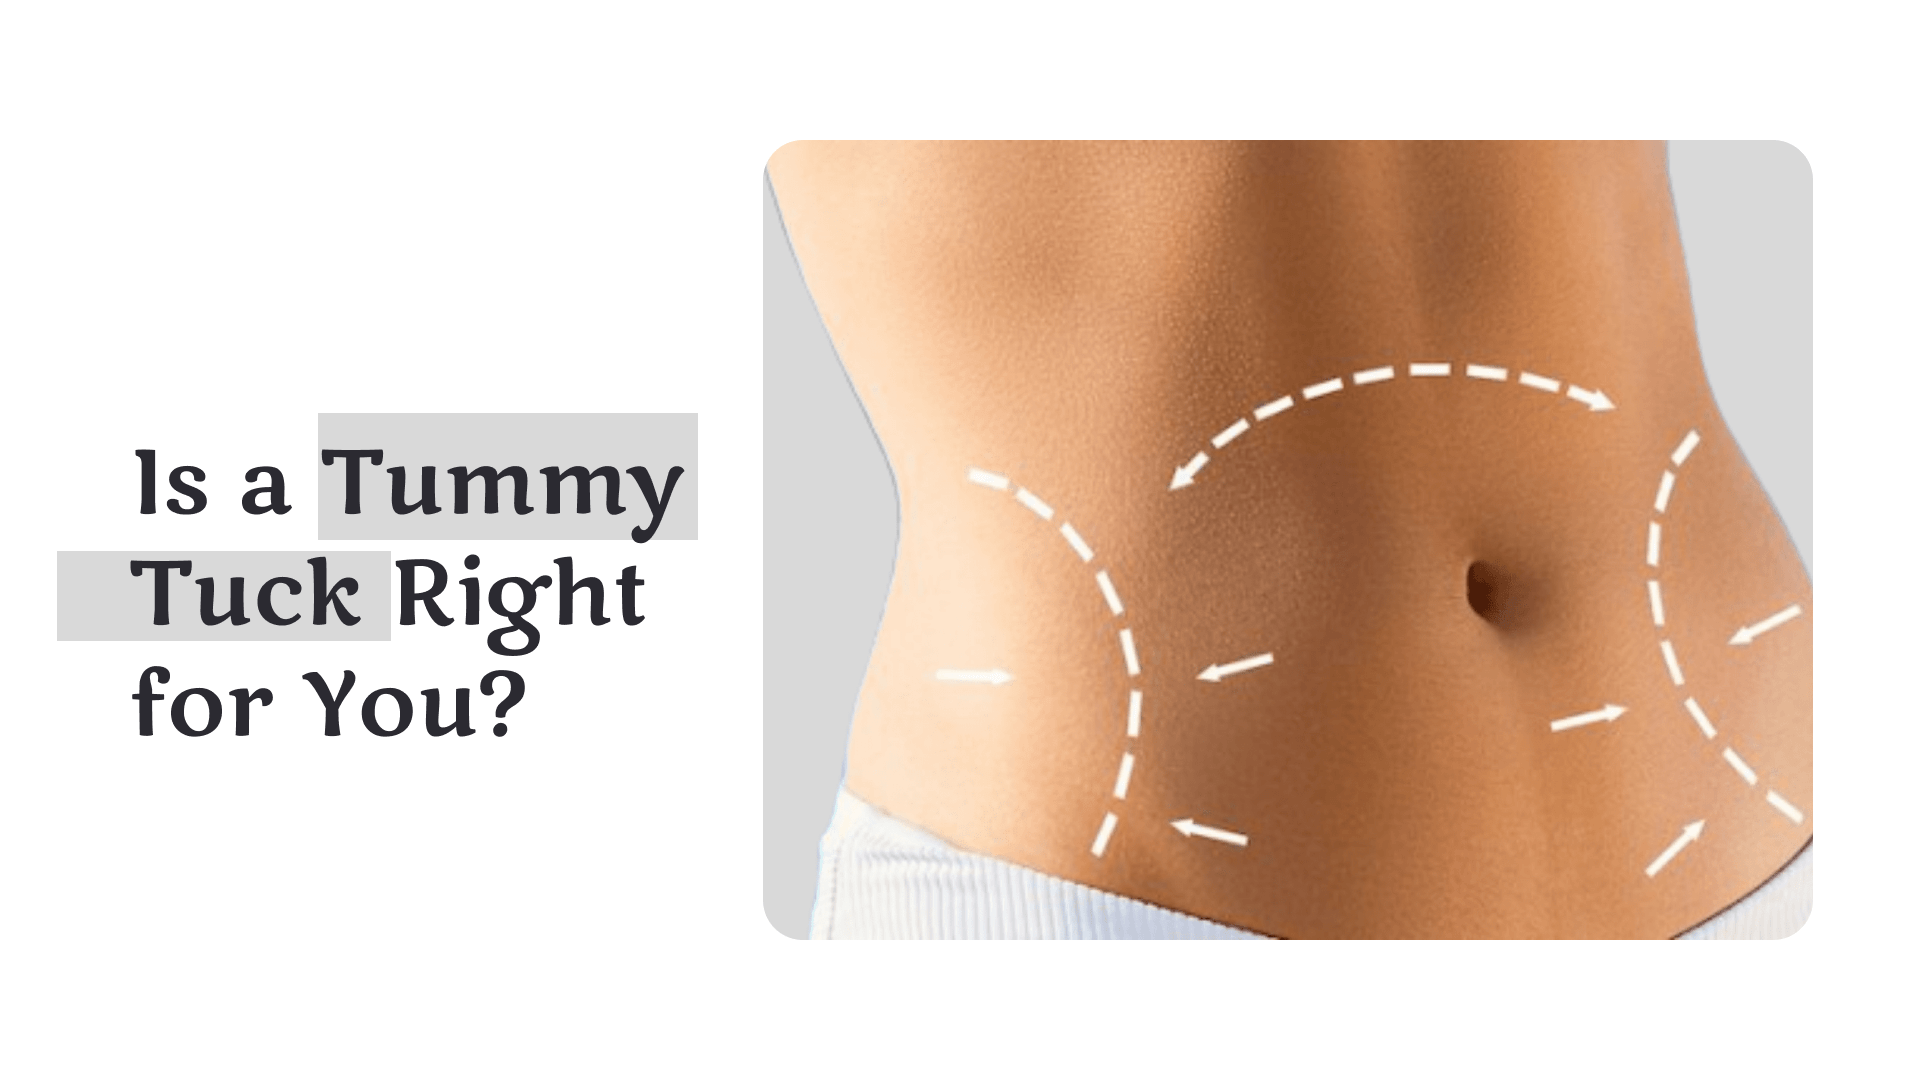 Is a Tummy Tuck Right for You?